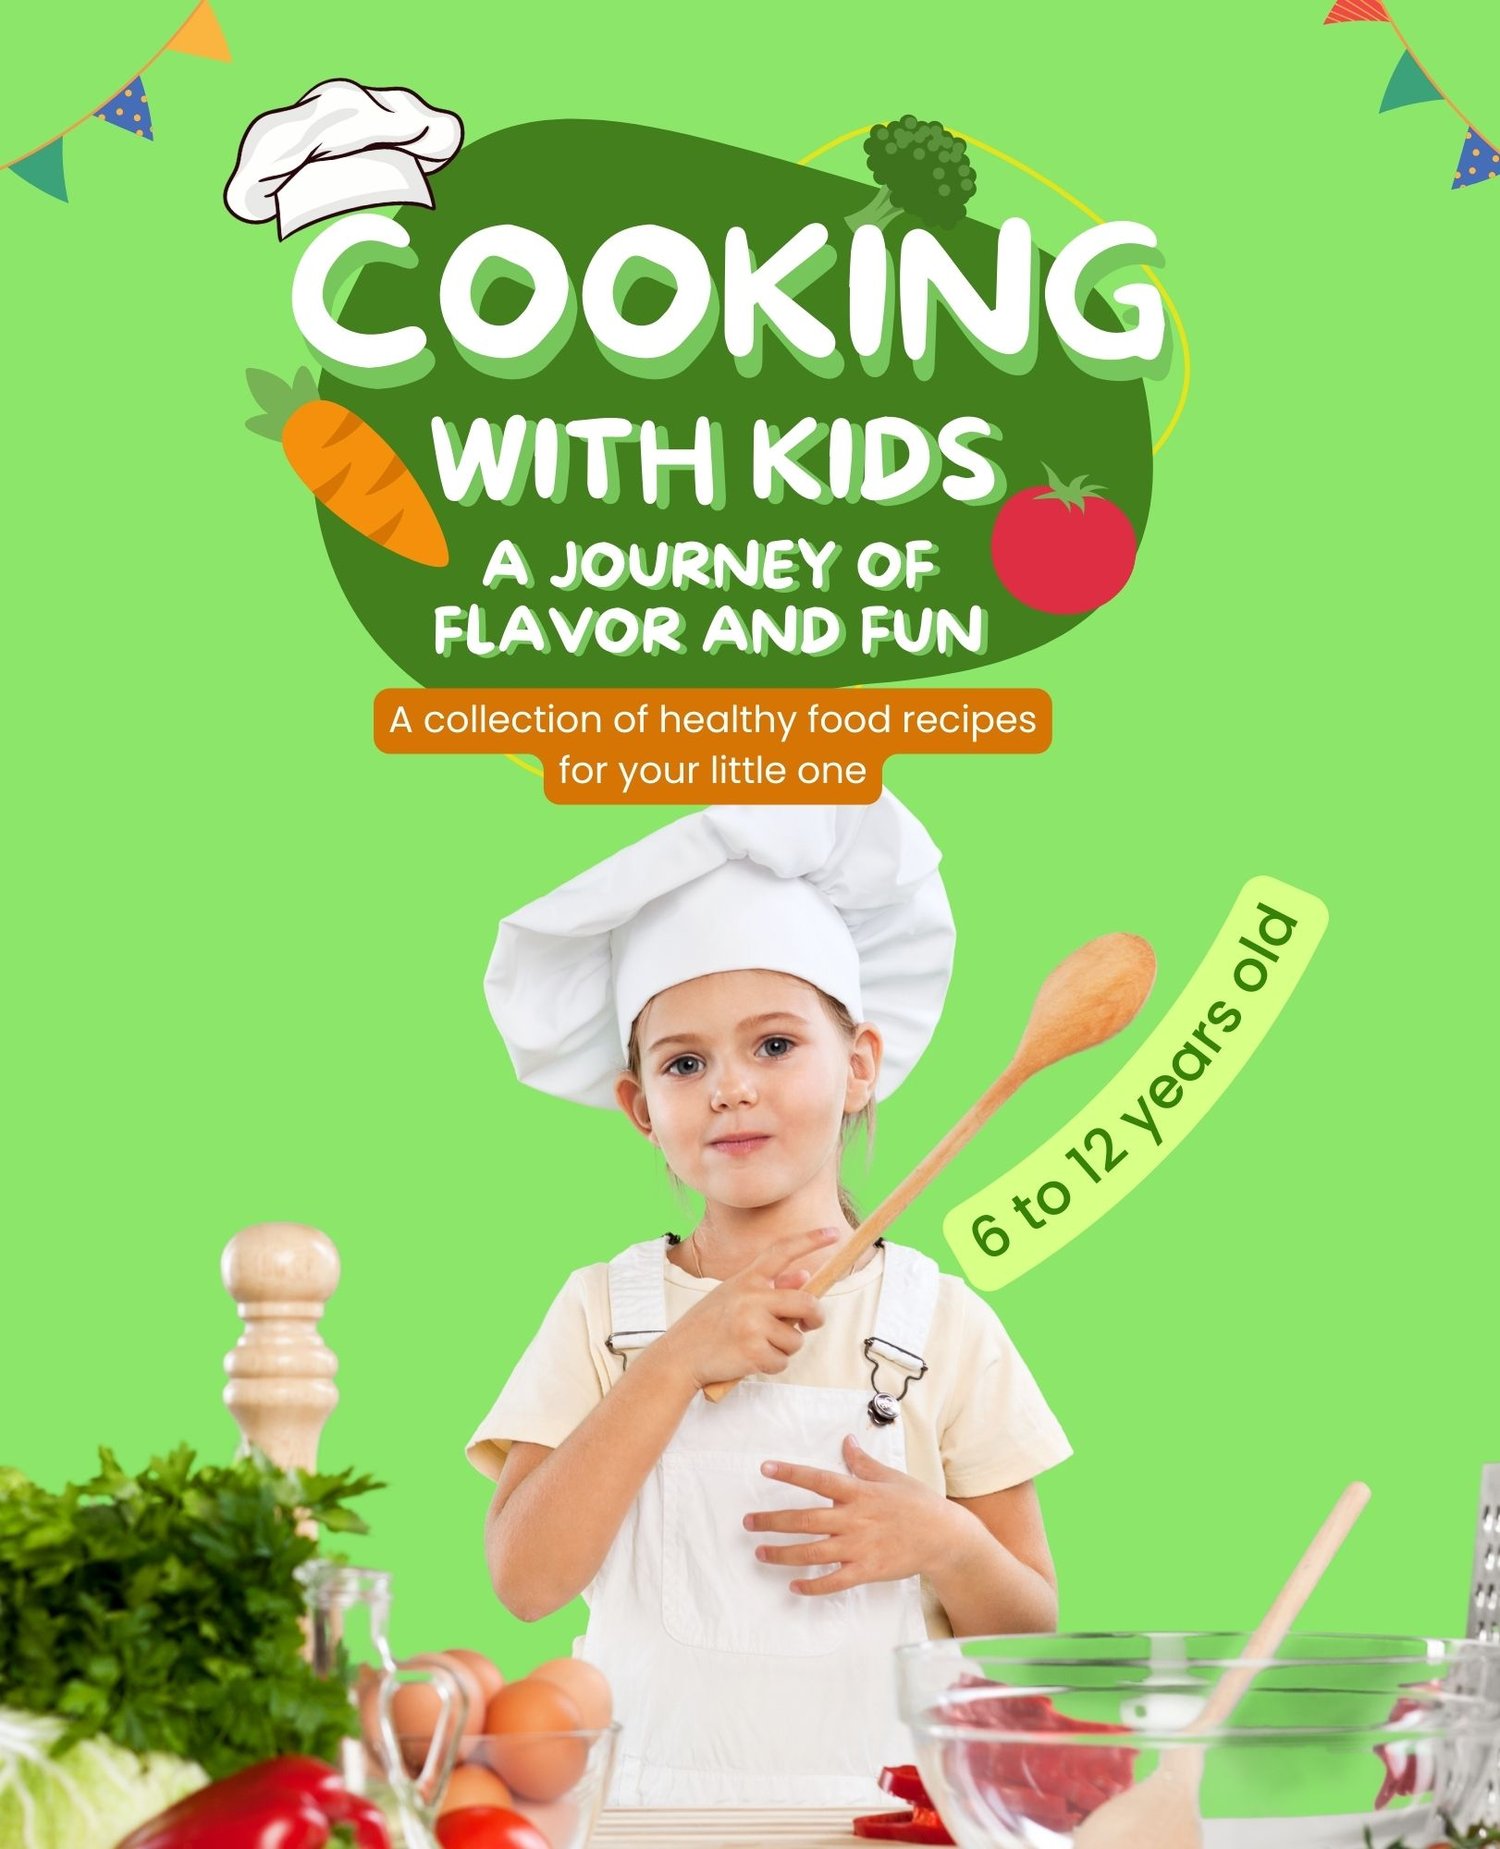 Cooking with Kids A Journey of Flavor and Fun - Super Awesome, Crazy Fun, Best Ever Cookbook